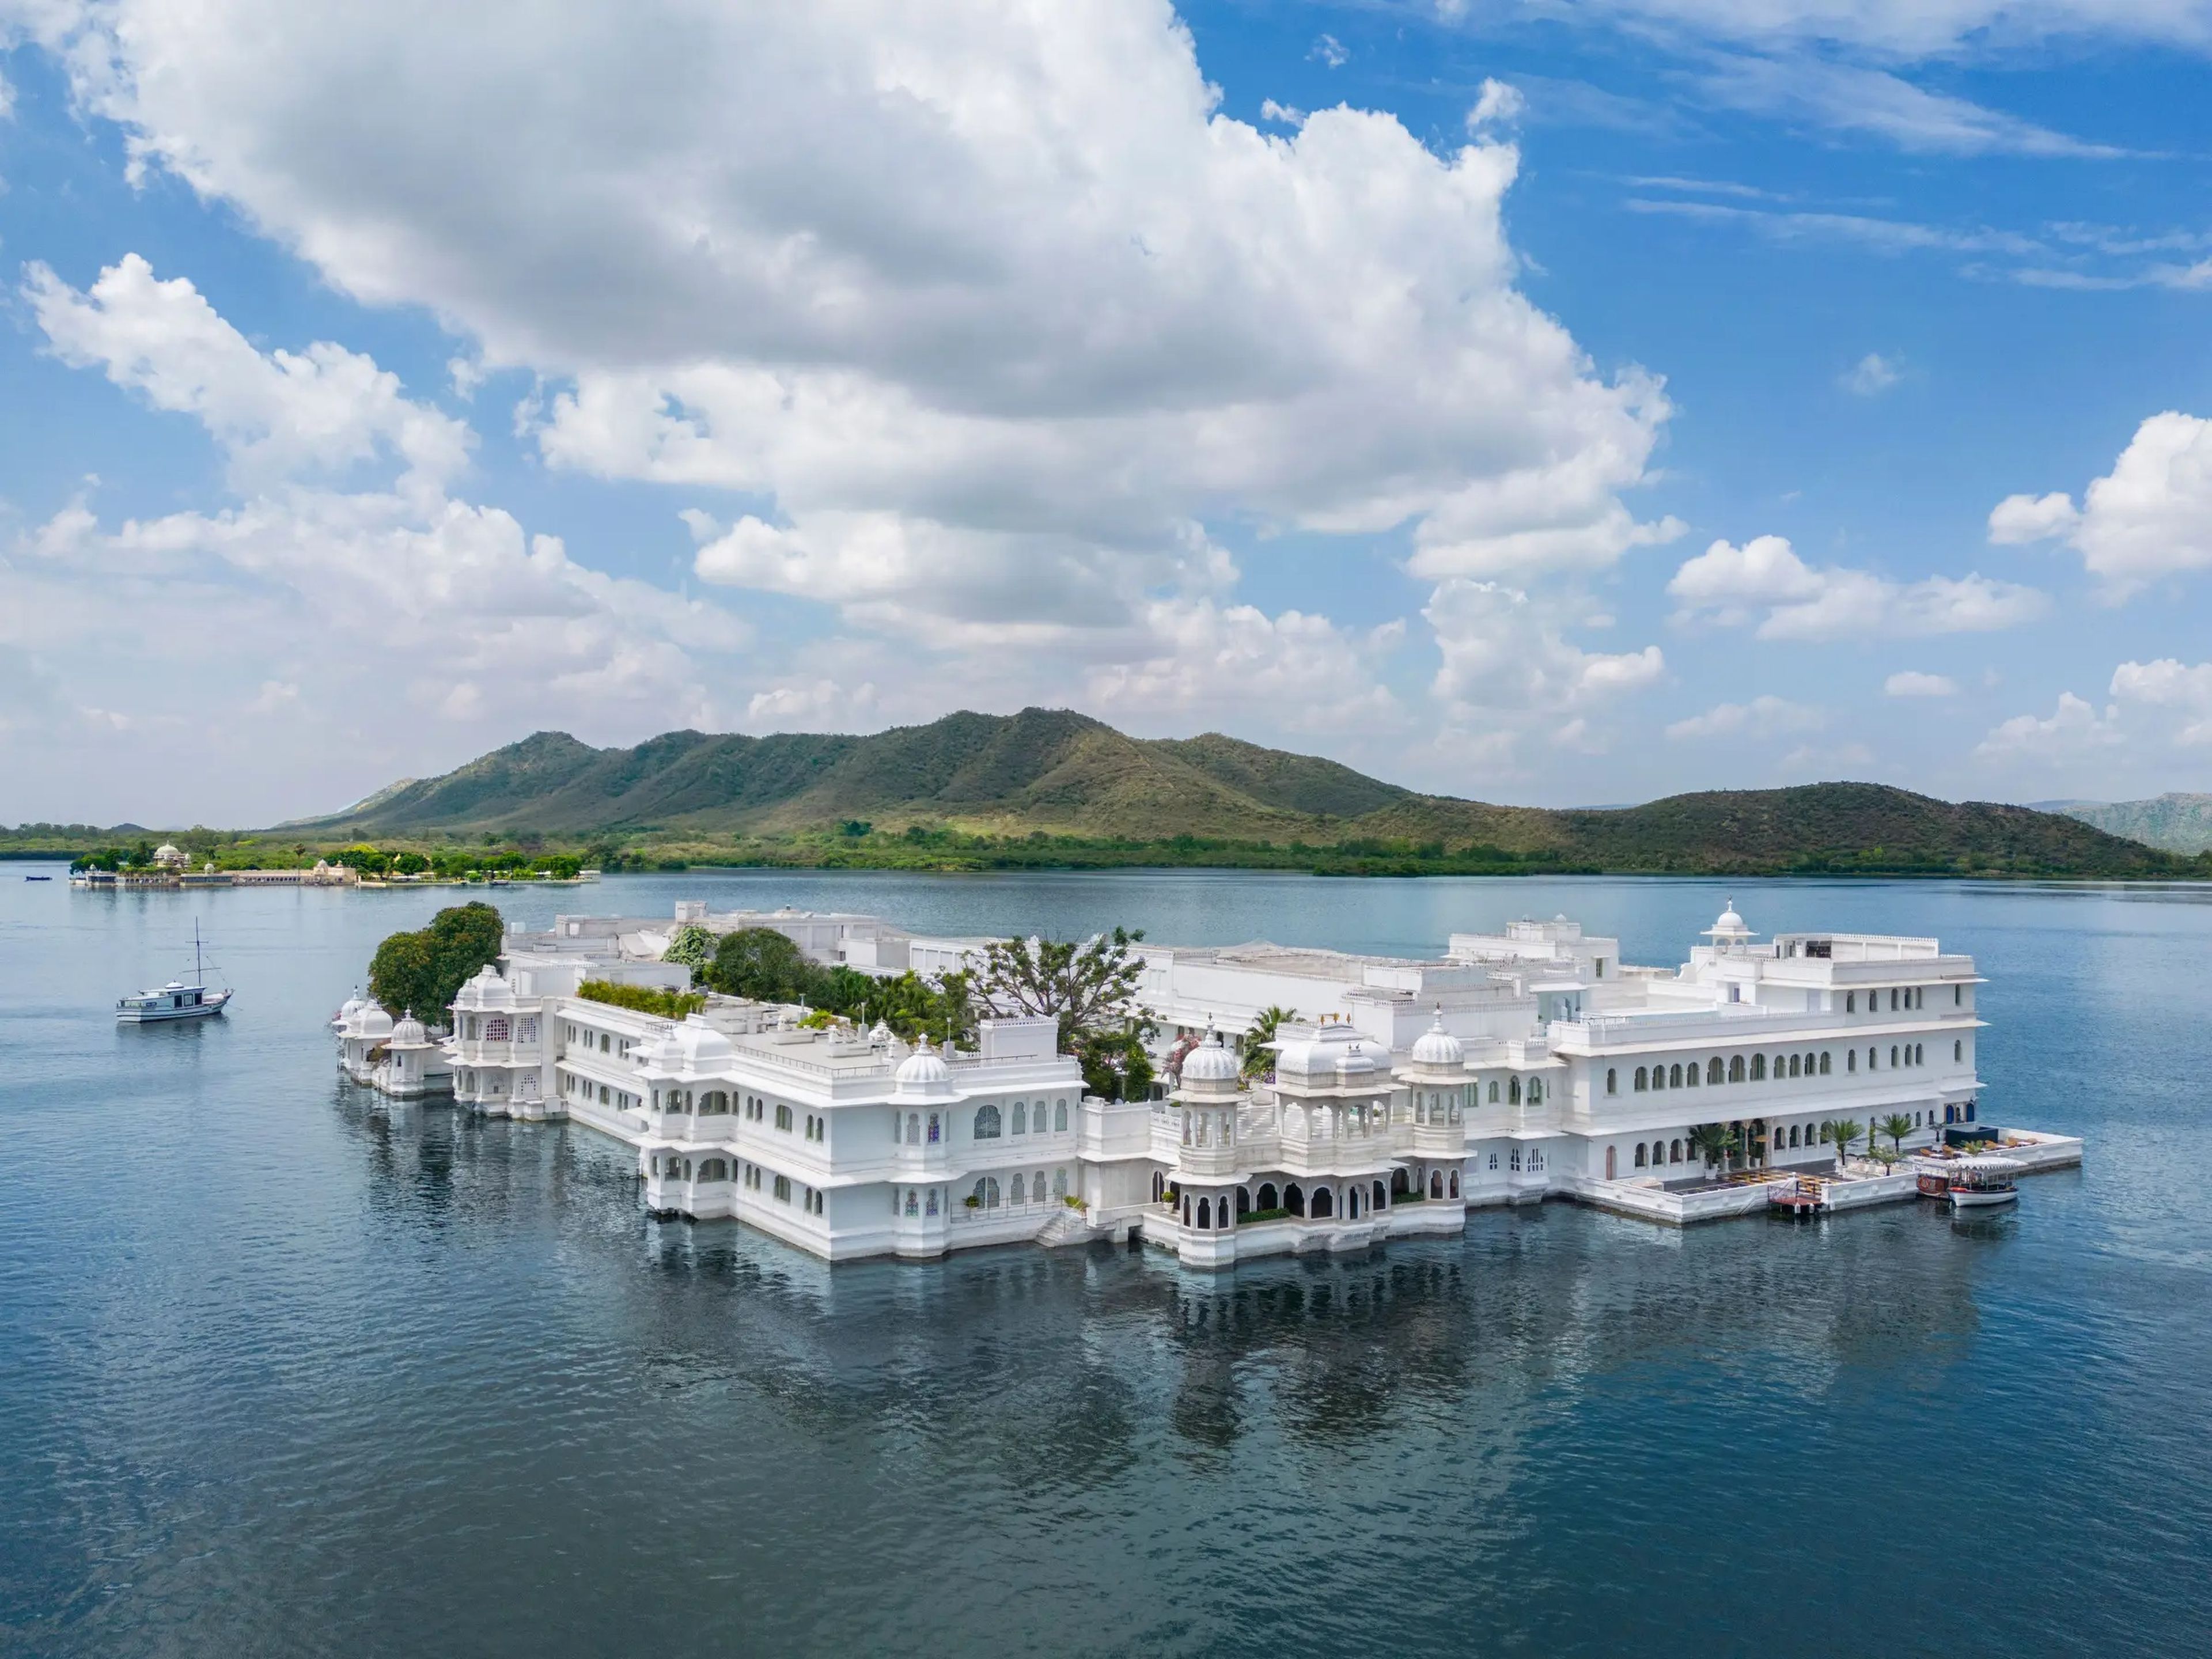 A large white hotel located in the middle of a lake with mountains in the background.